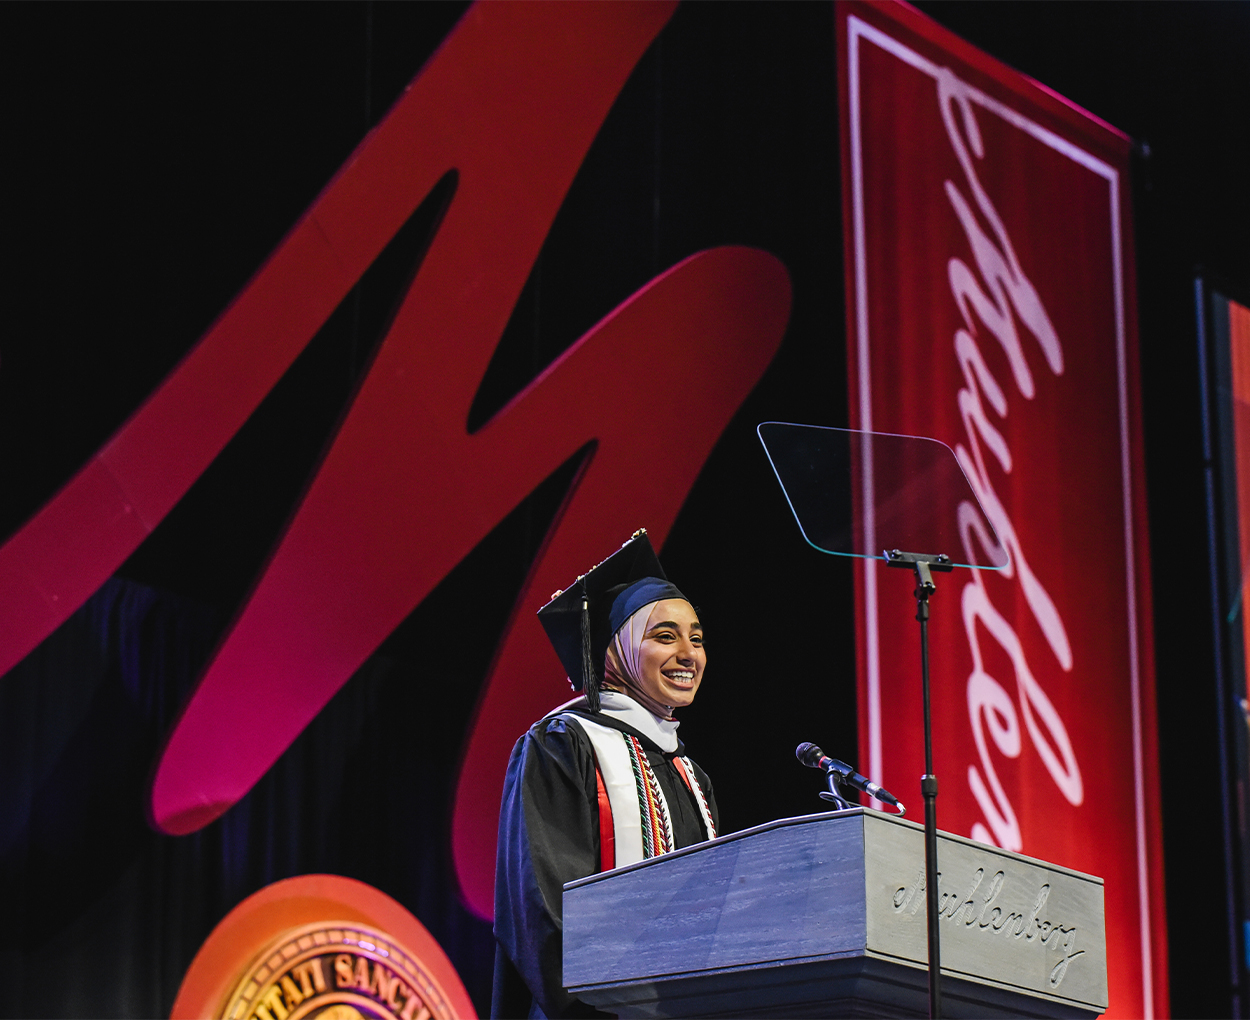 A female speaker with a headscarf is dressed in full commencement regalia is speaking at a podium on stage.